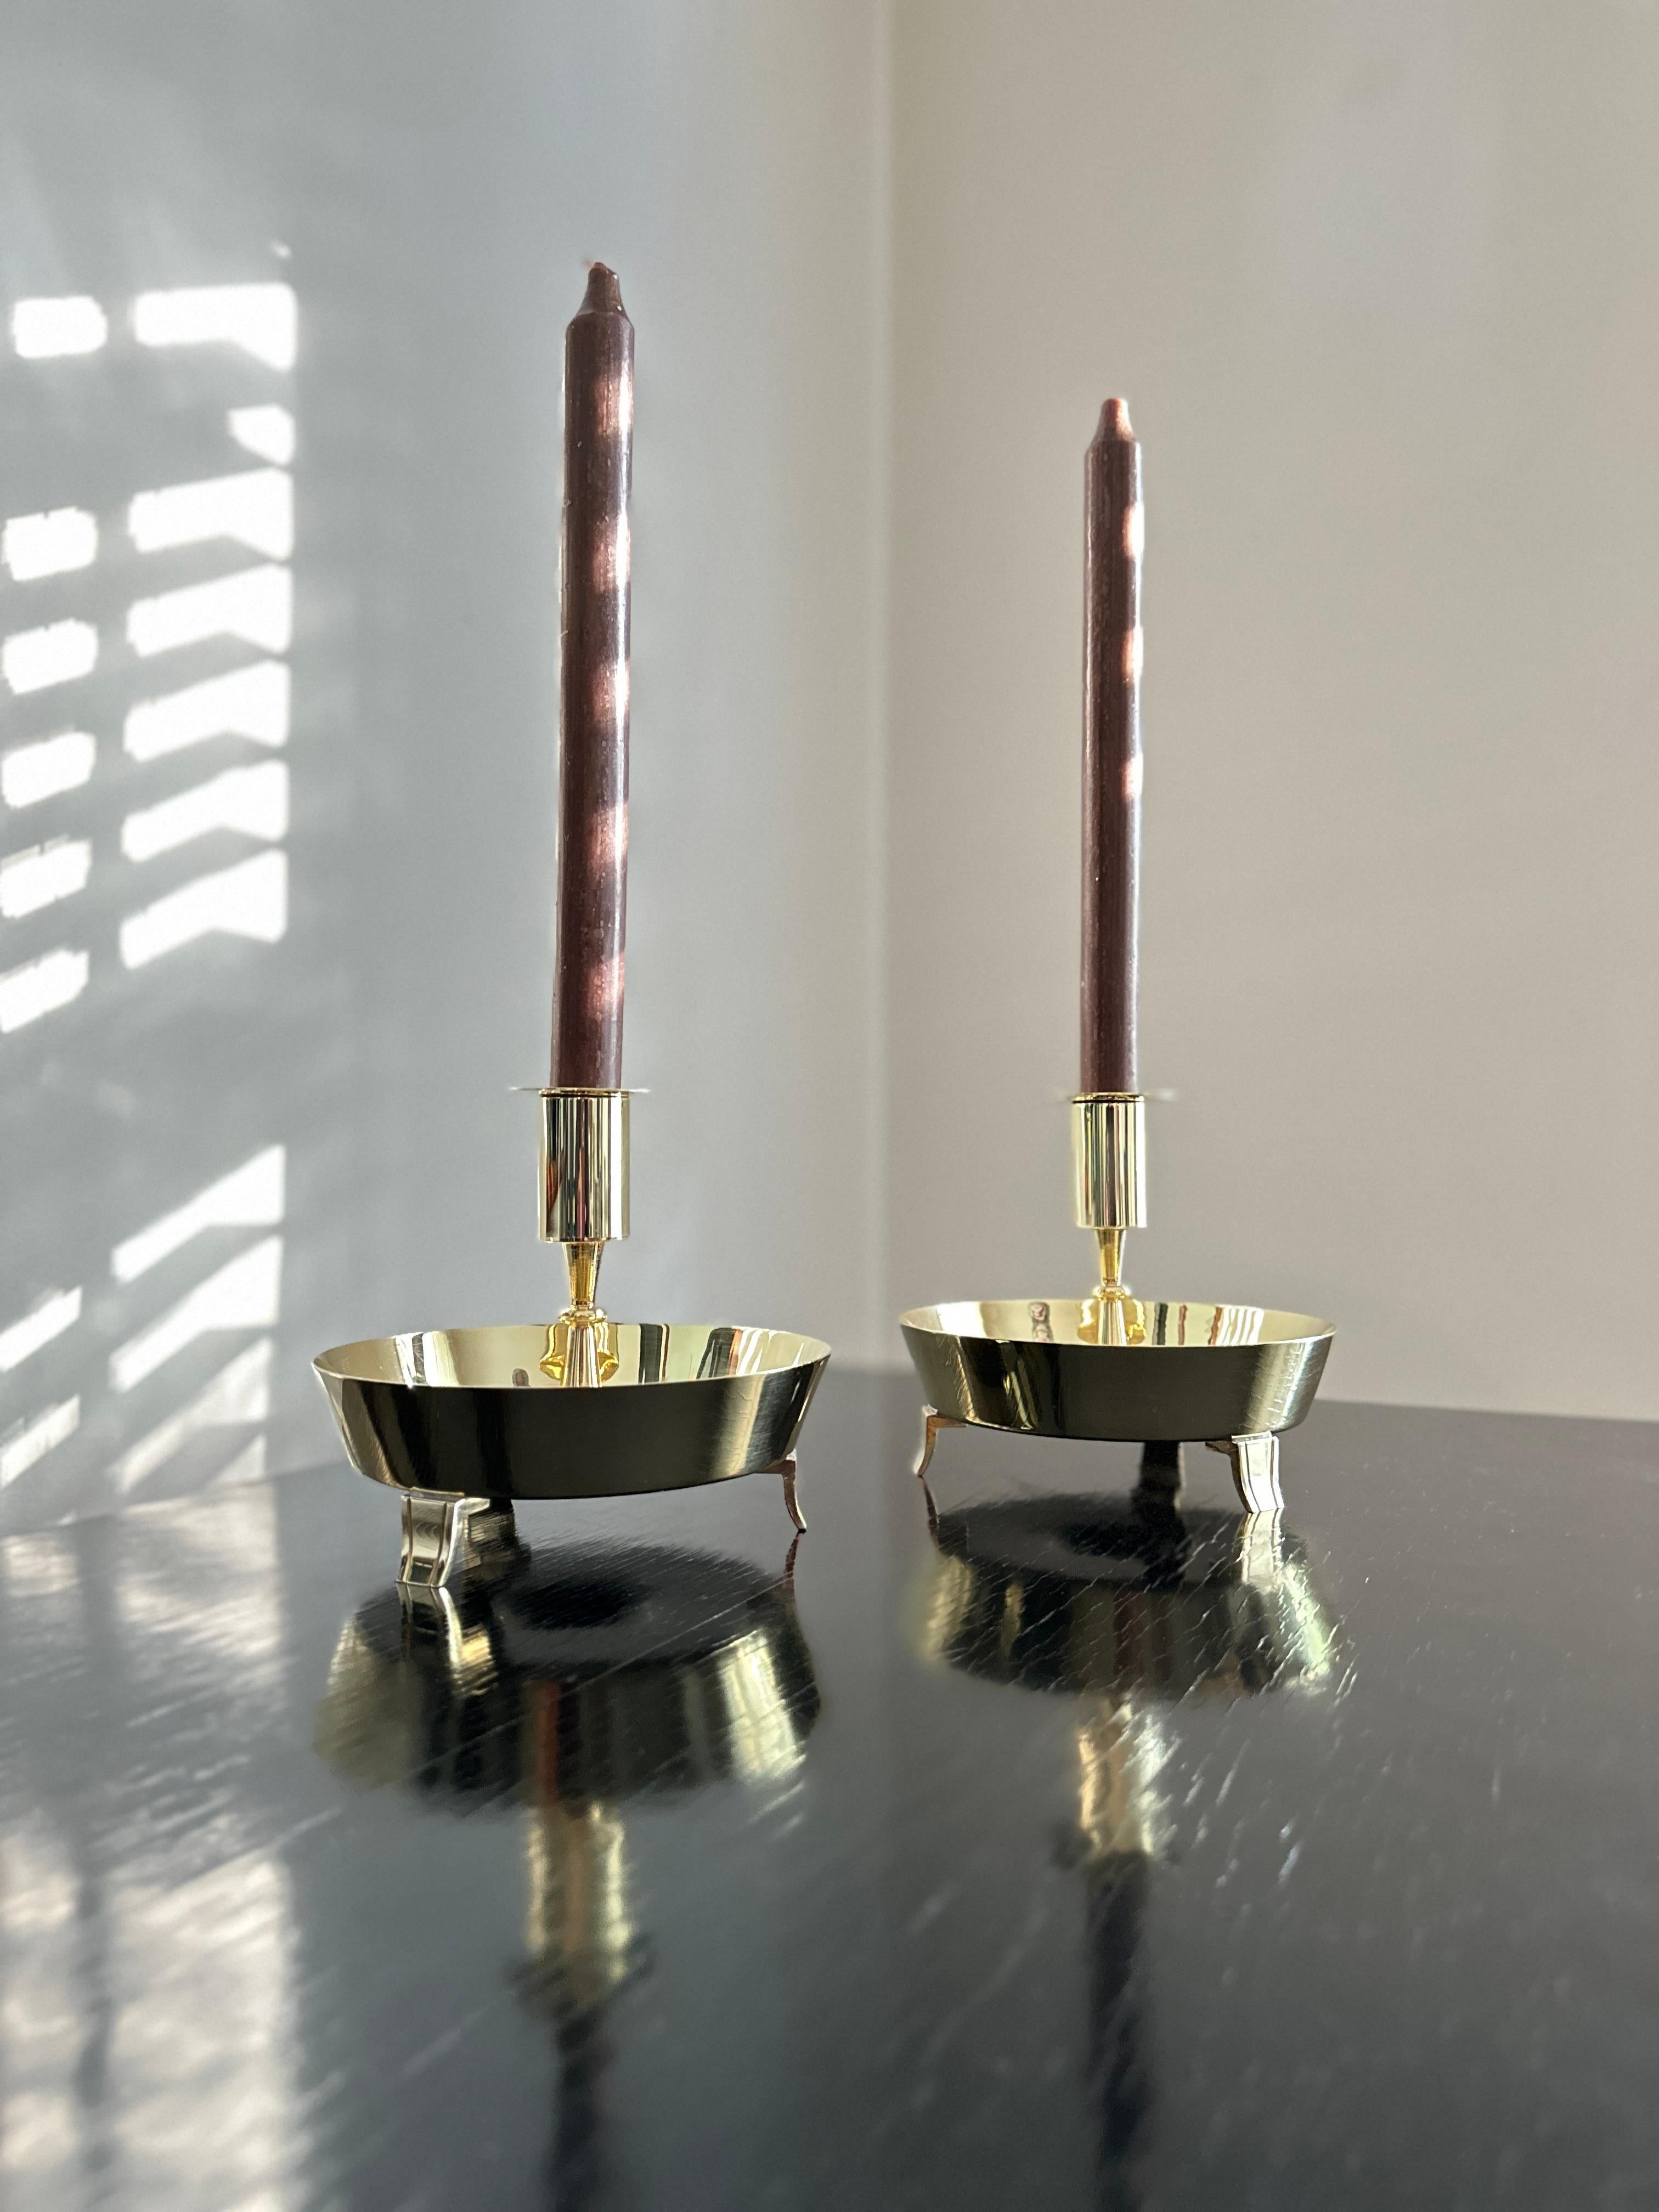 An obscure design by Tommi Parzinger for Dorlyn Silversmiths. A pair of vintage solid brass candlesticks with removable bobeche's listed in the Dorlyn Silversmiths catalog as 